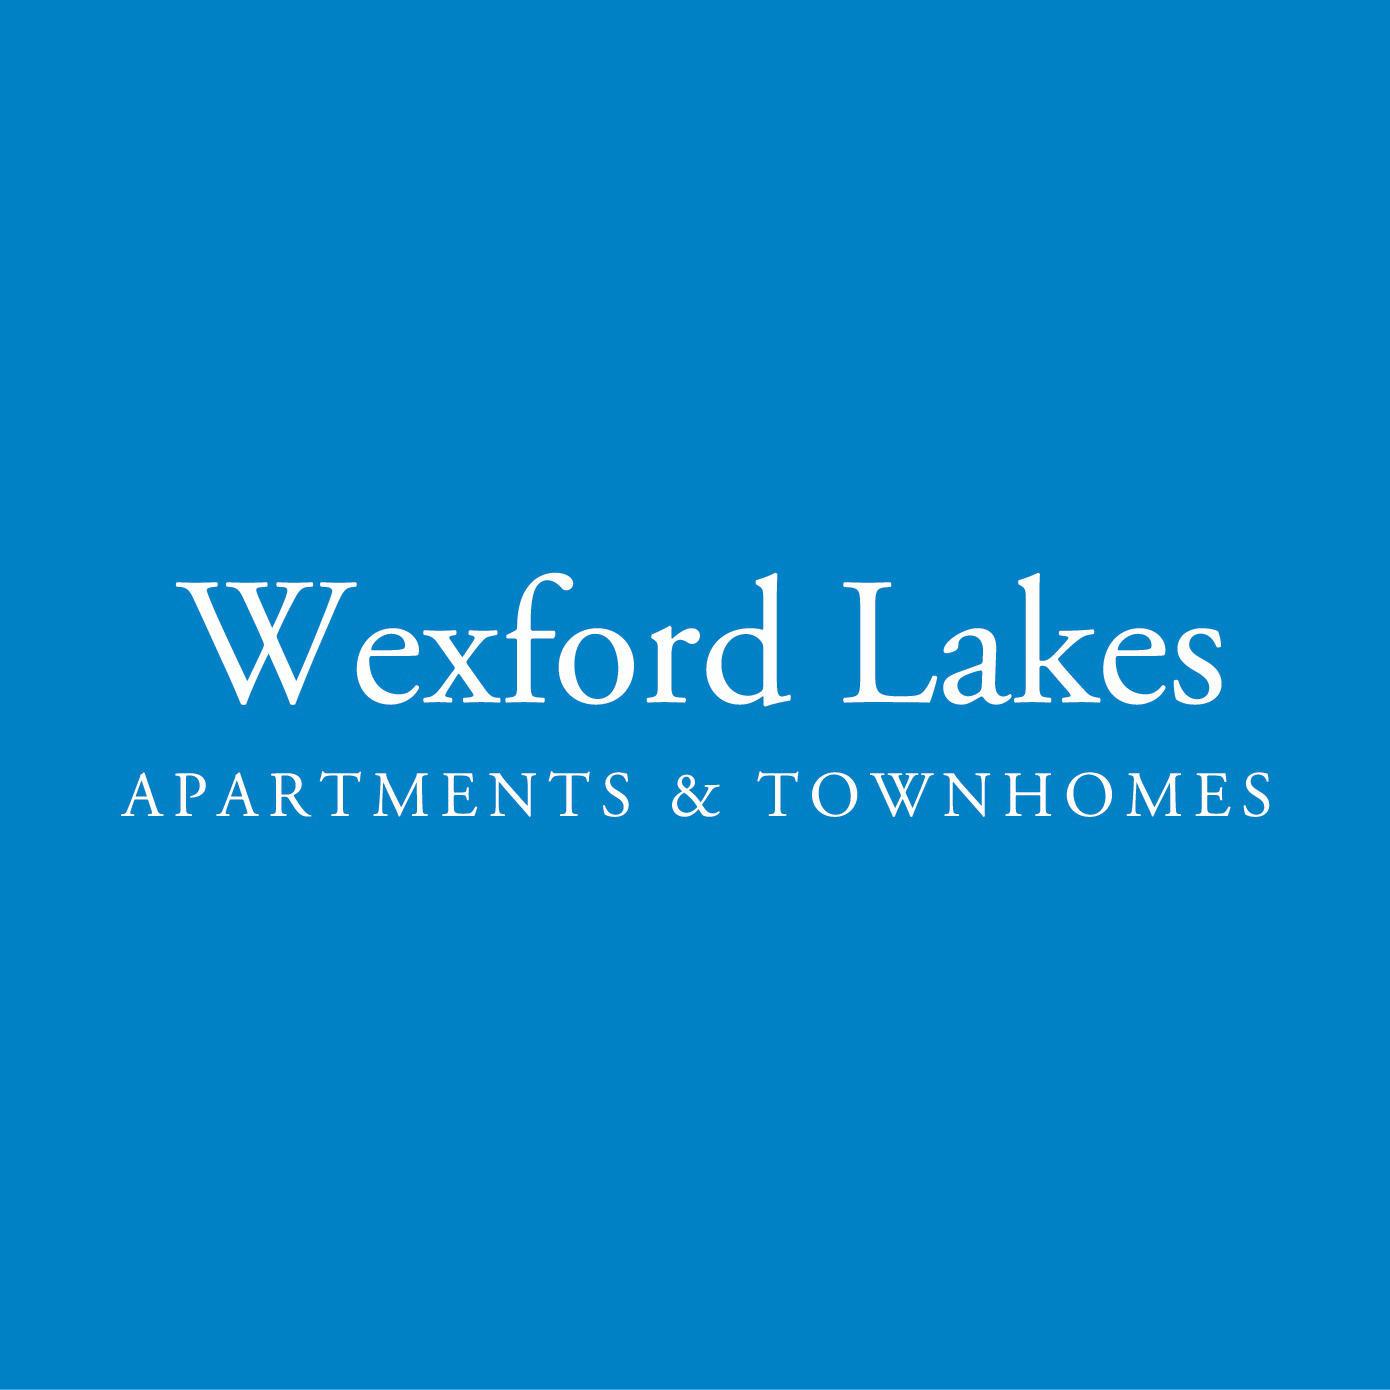 Wexford Lakes Apartments Homes and Townhomes